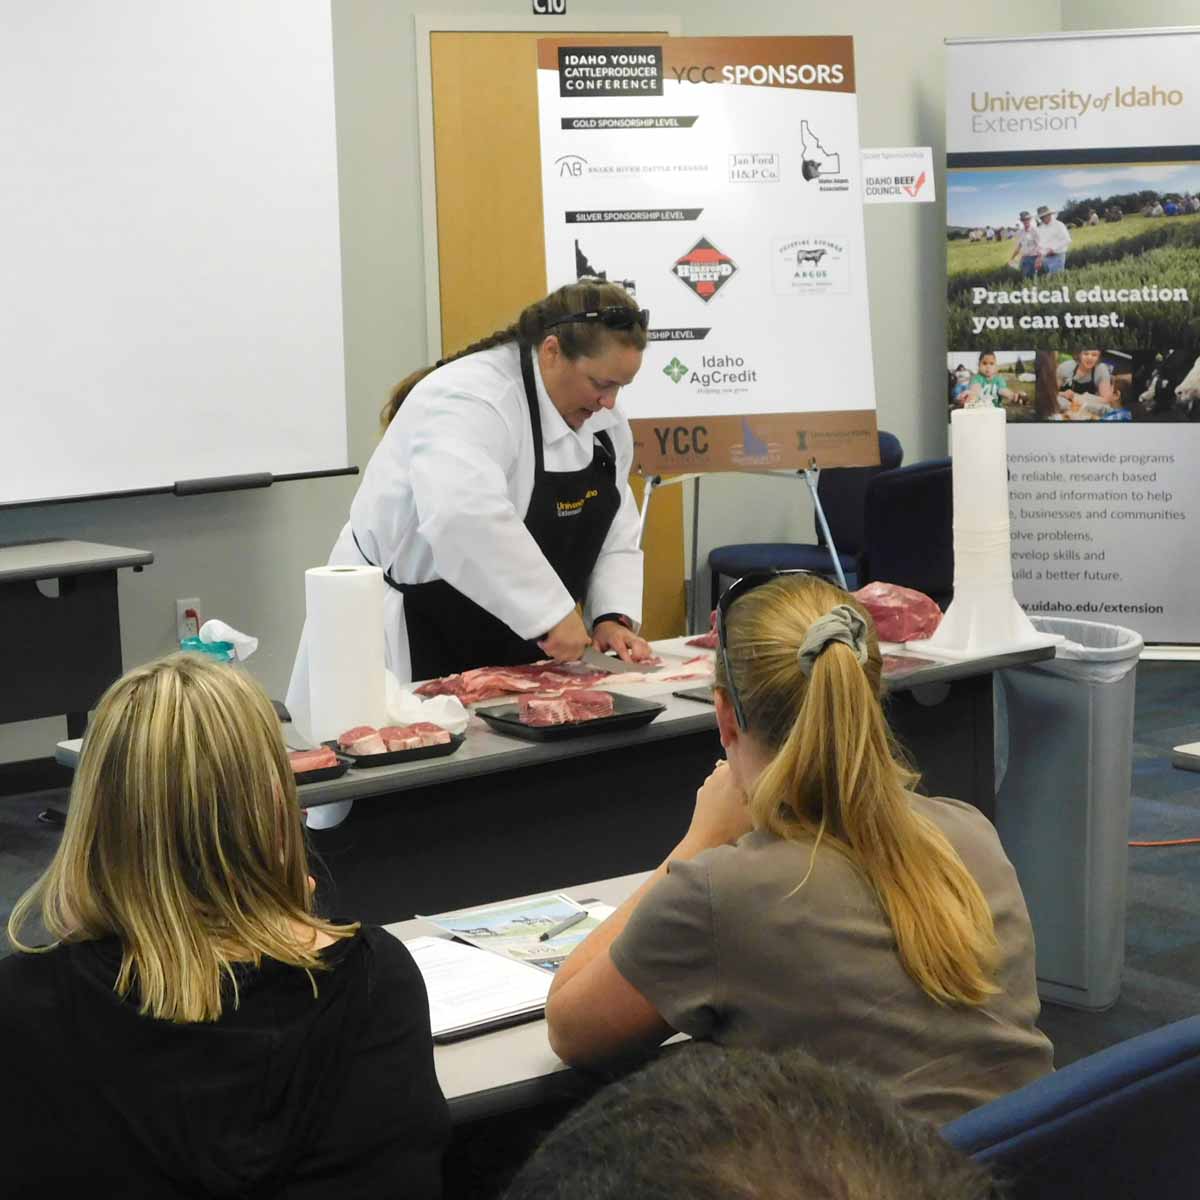 University of Idaho Extension Educator Sarah Baker conducts a cutting demonstration showcasing how the Beef Alternative Merchandising program helps keep beef center of the plate for consumers.